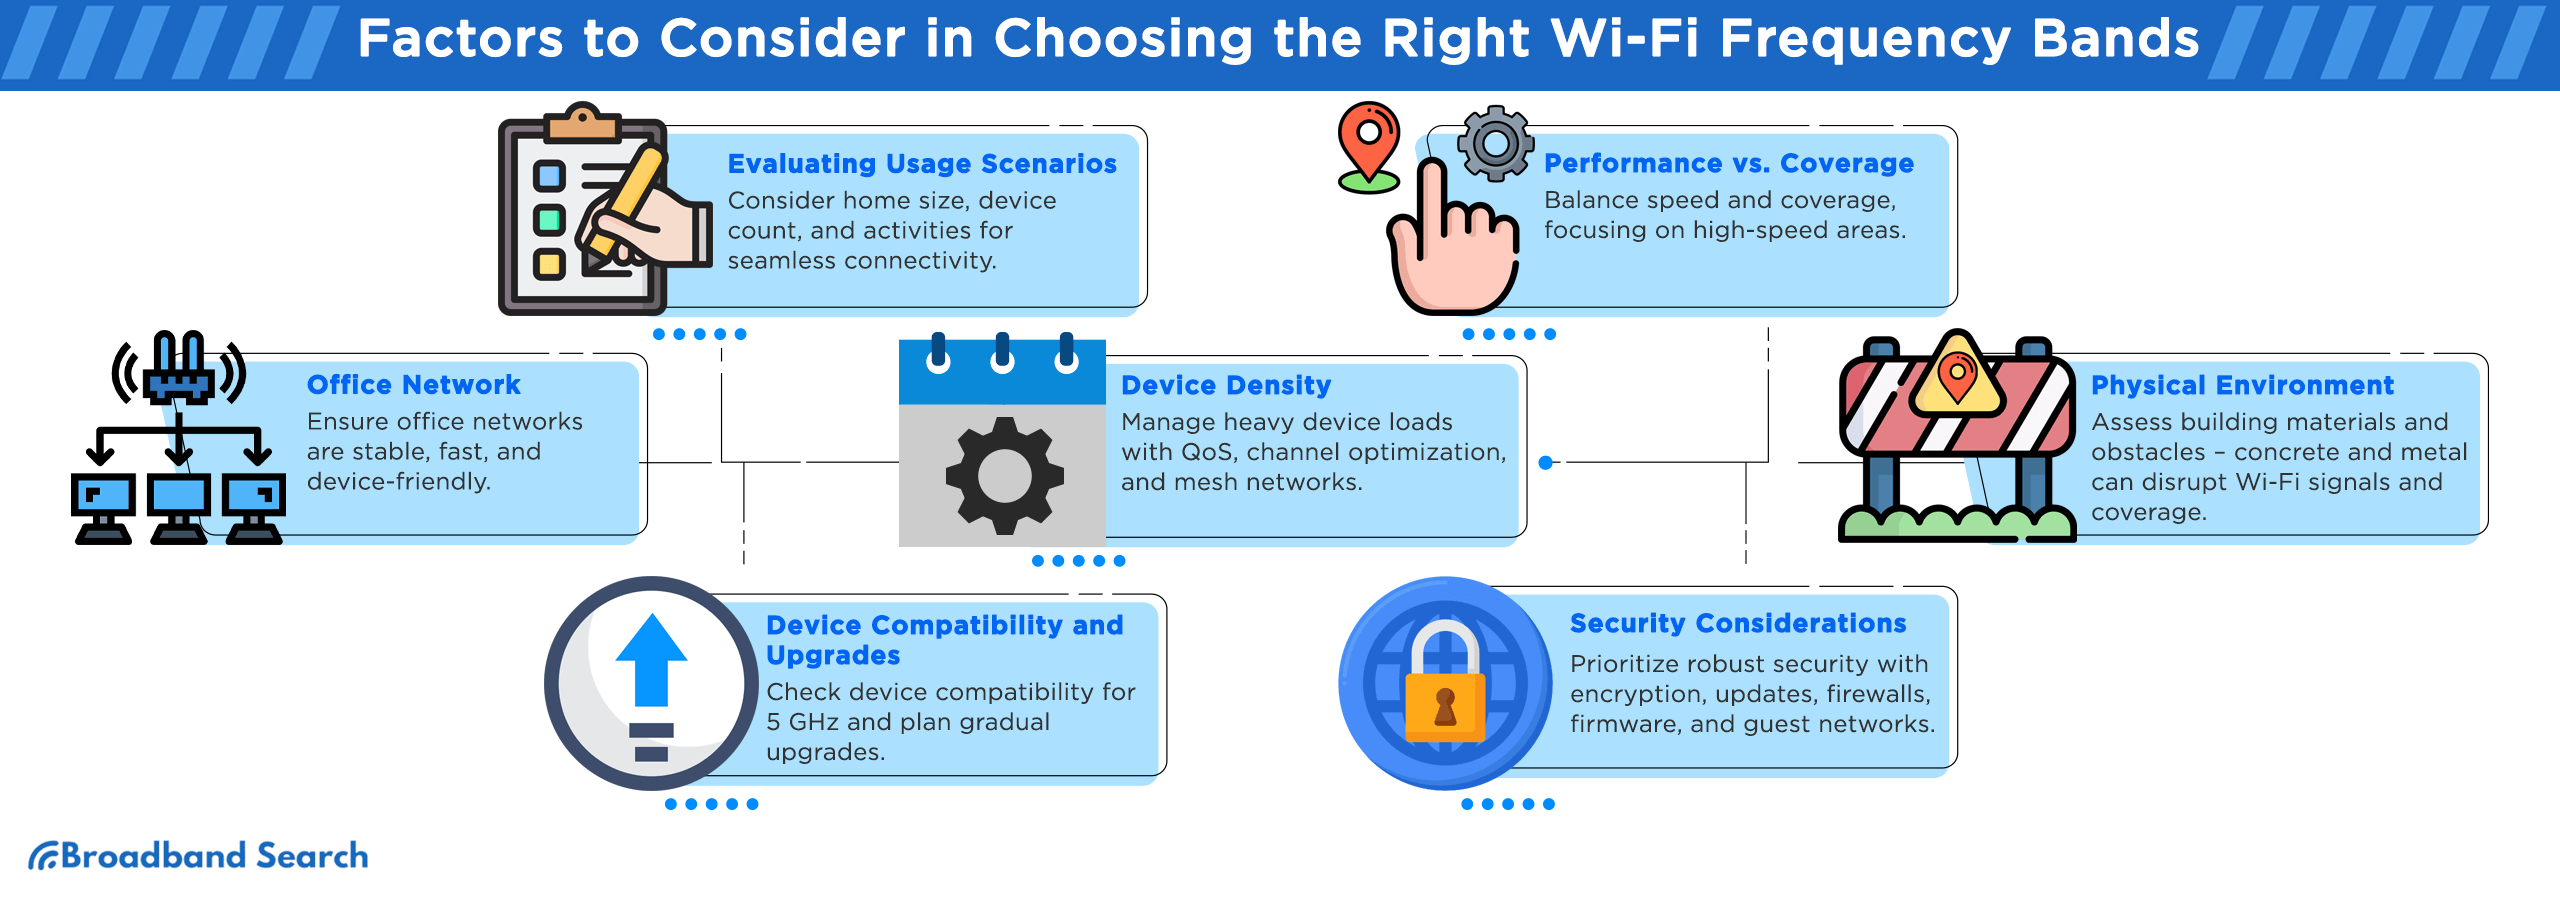 Factors to consider in choosing the right wi-fi frequency bands